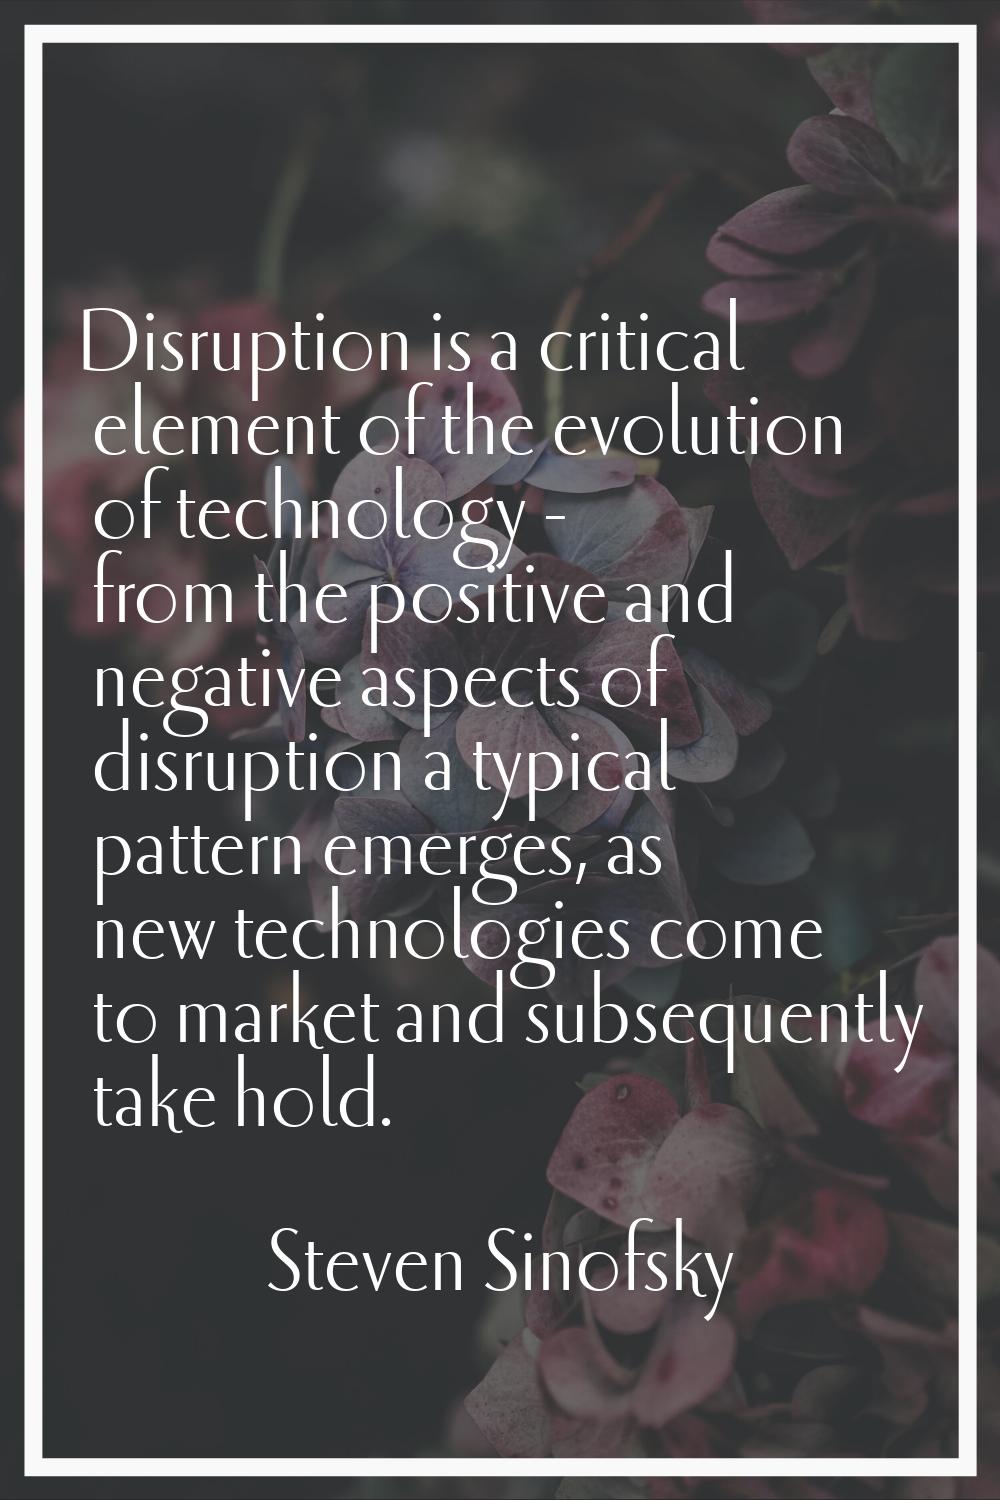 Disruption is a critical element of the evolution of technology - from the positive and negative as